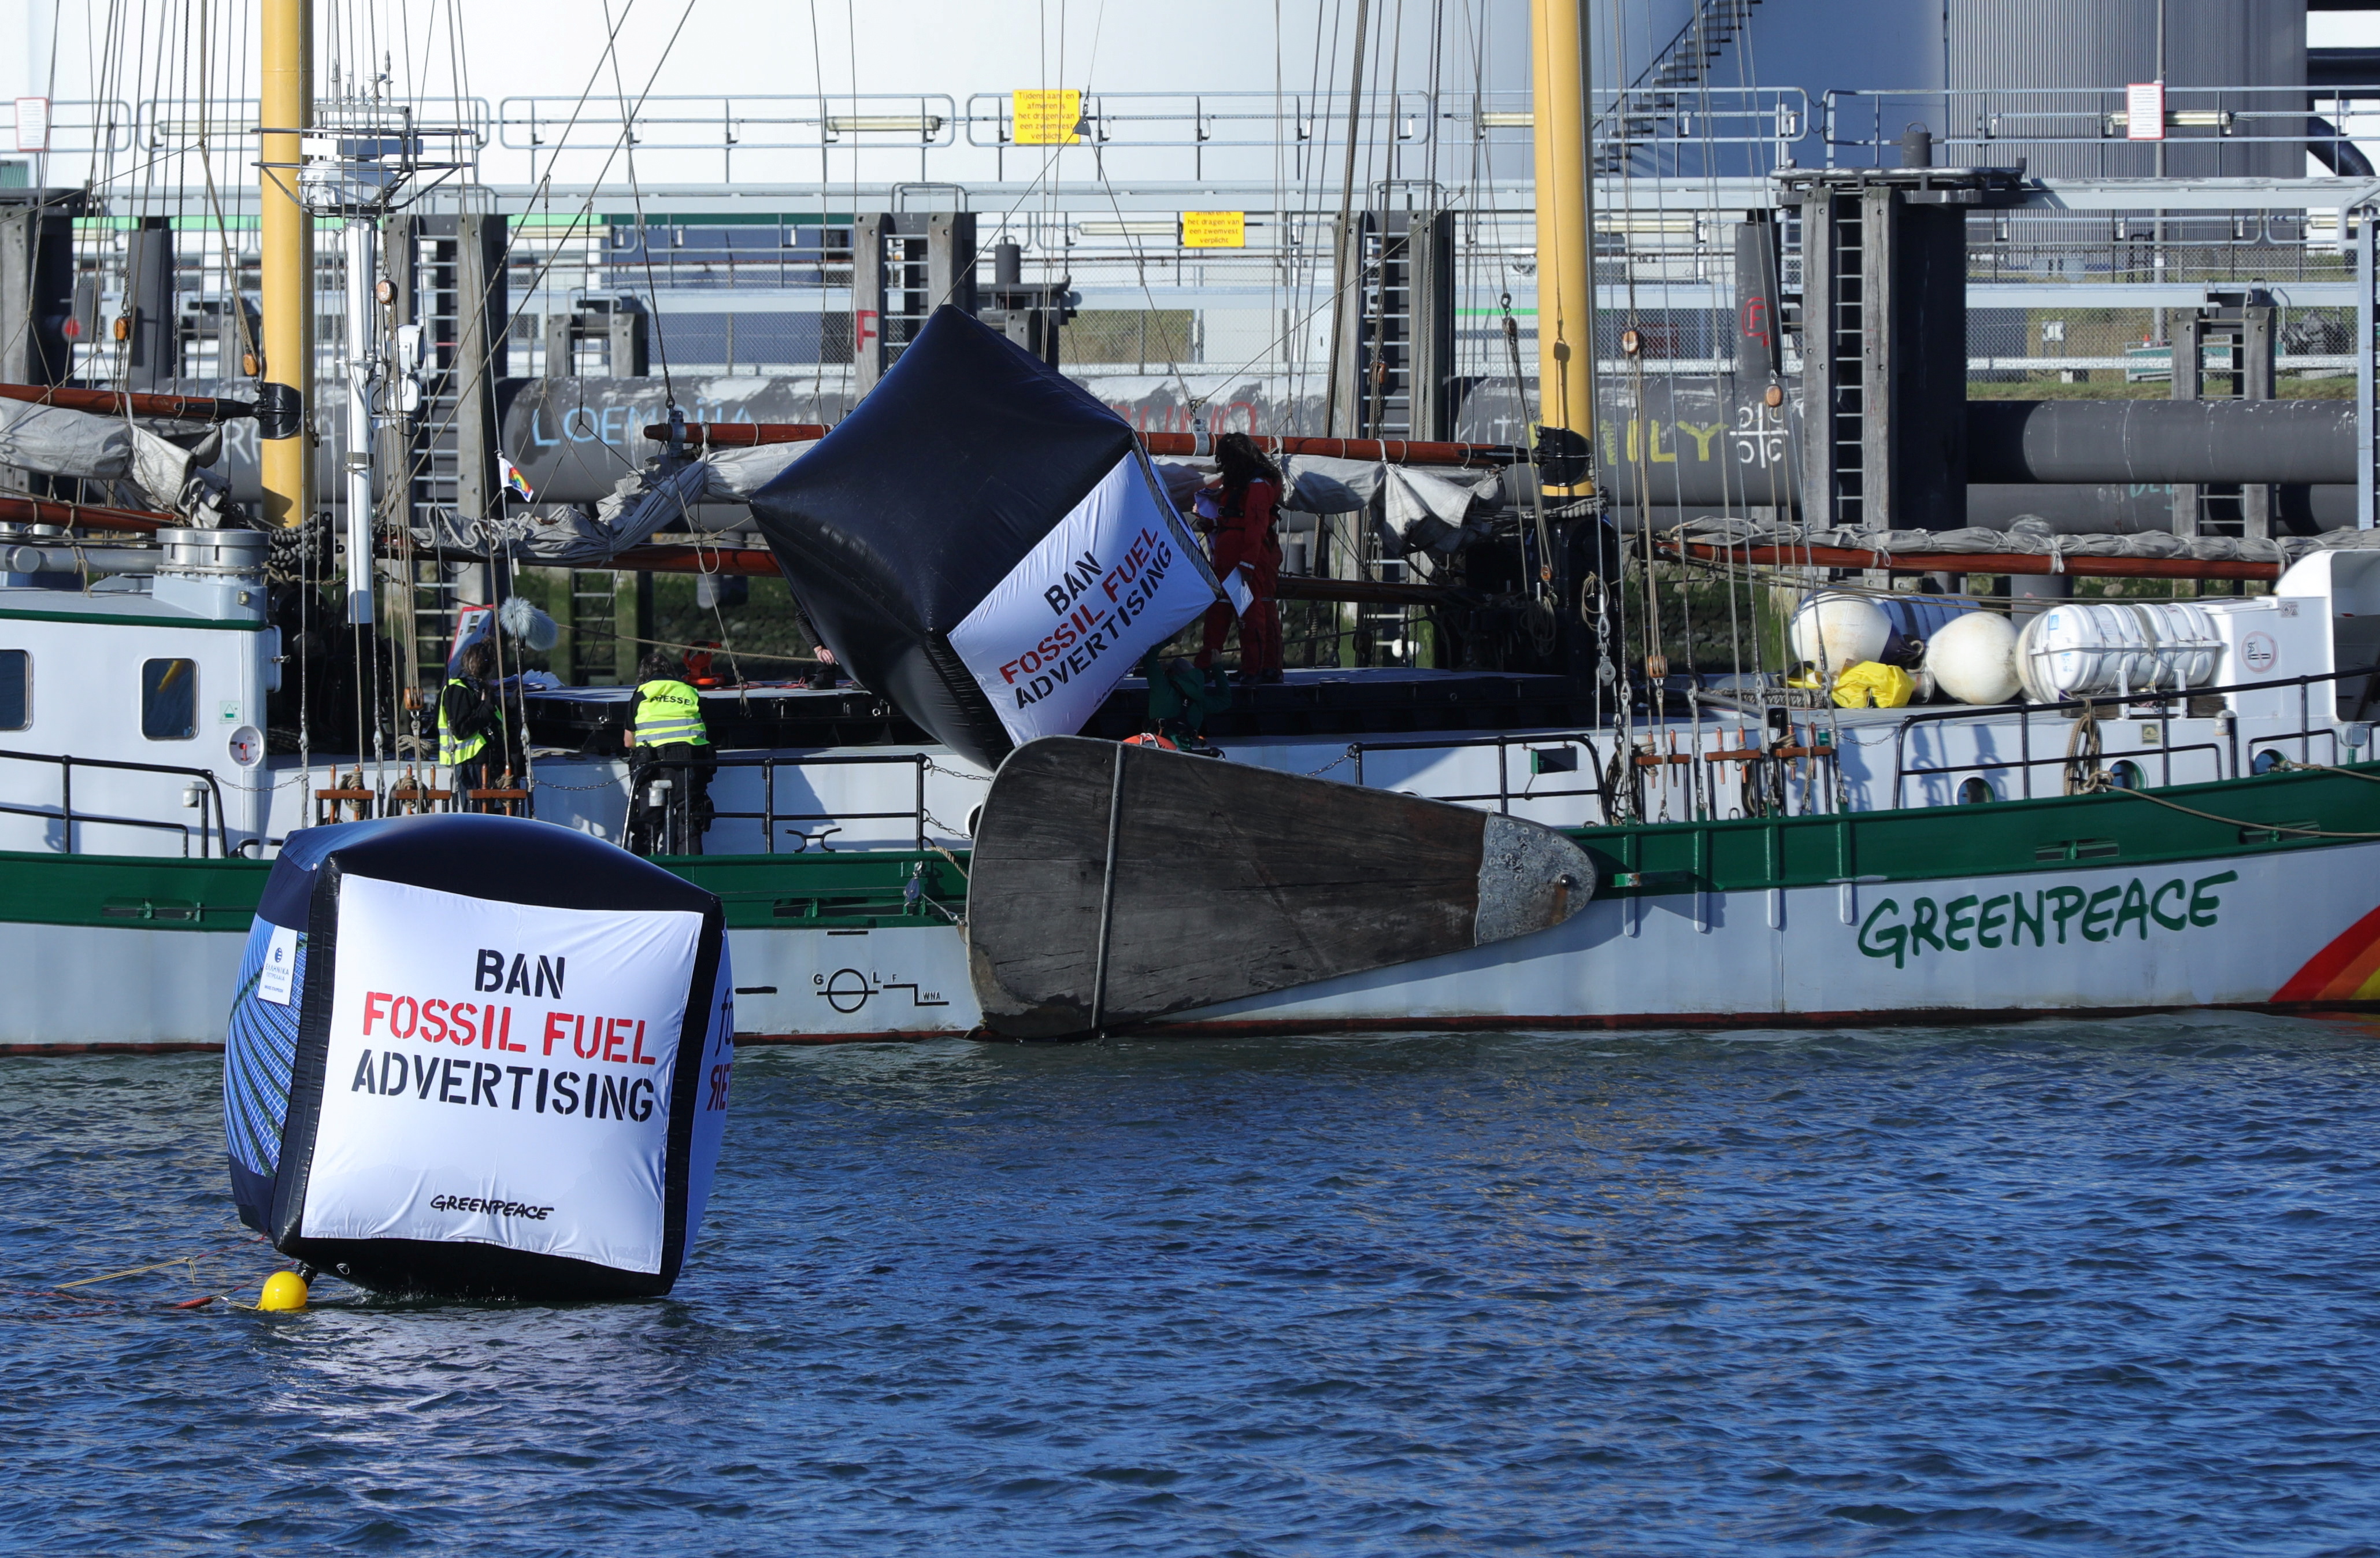 Enviromental activist groups including Greenpeace protest against 